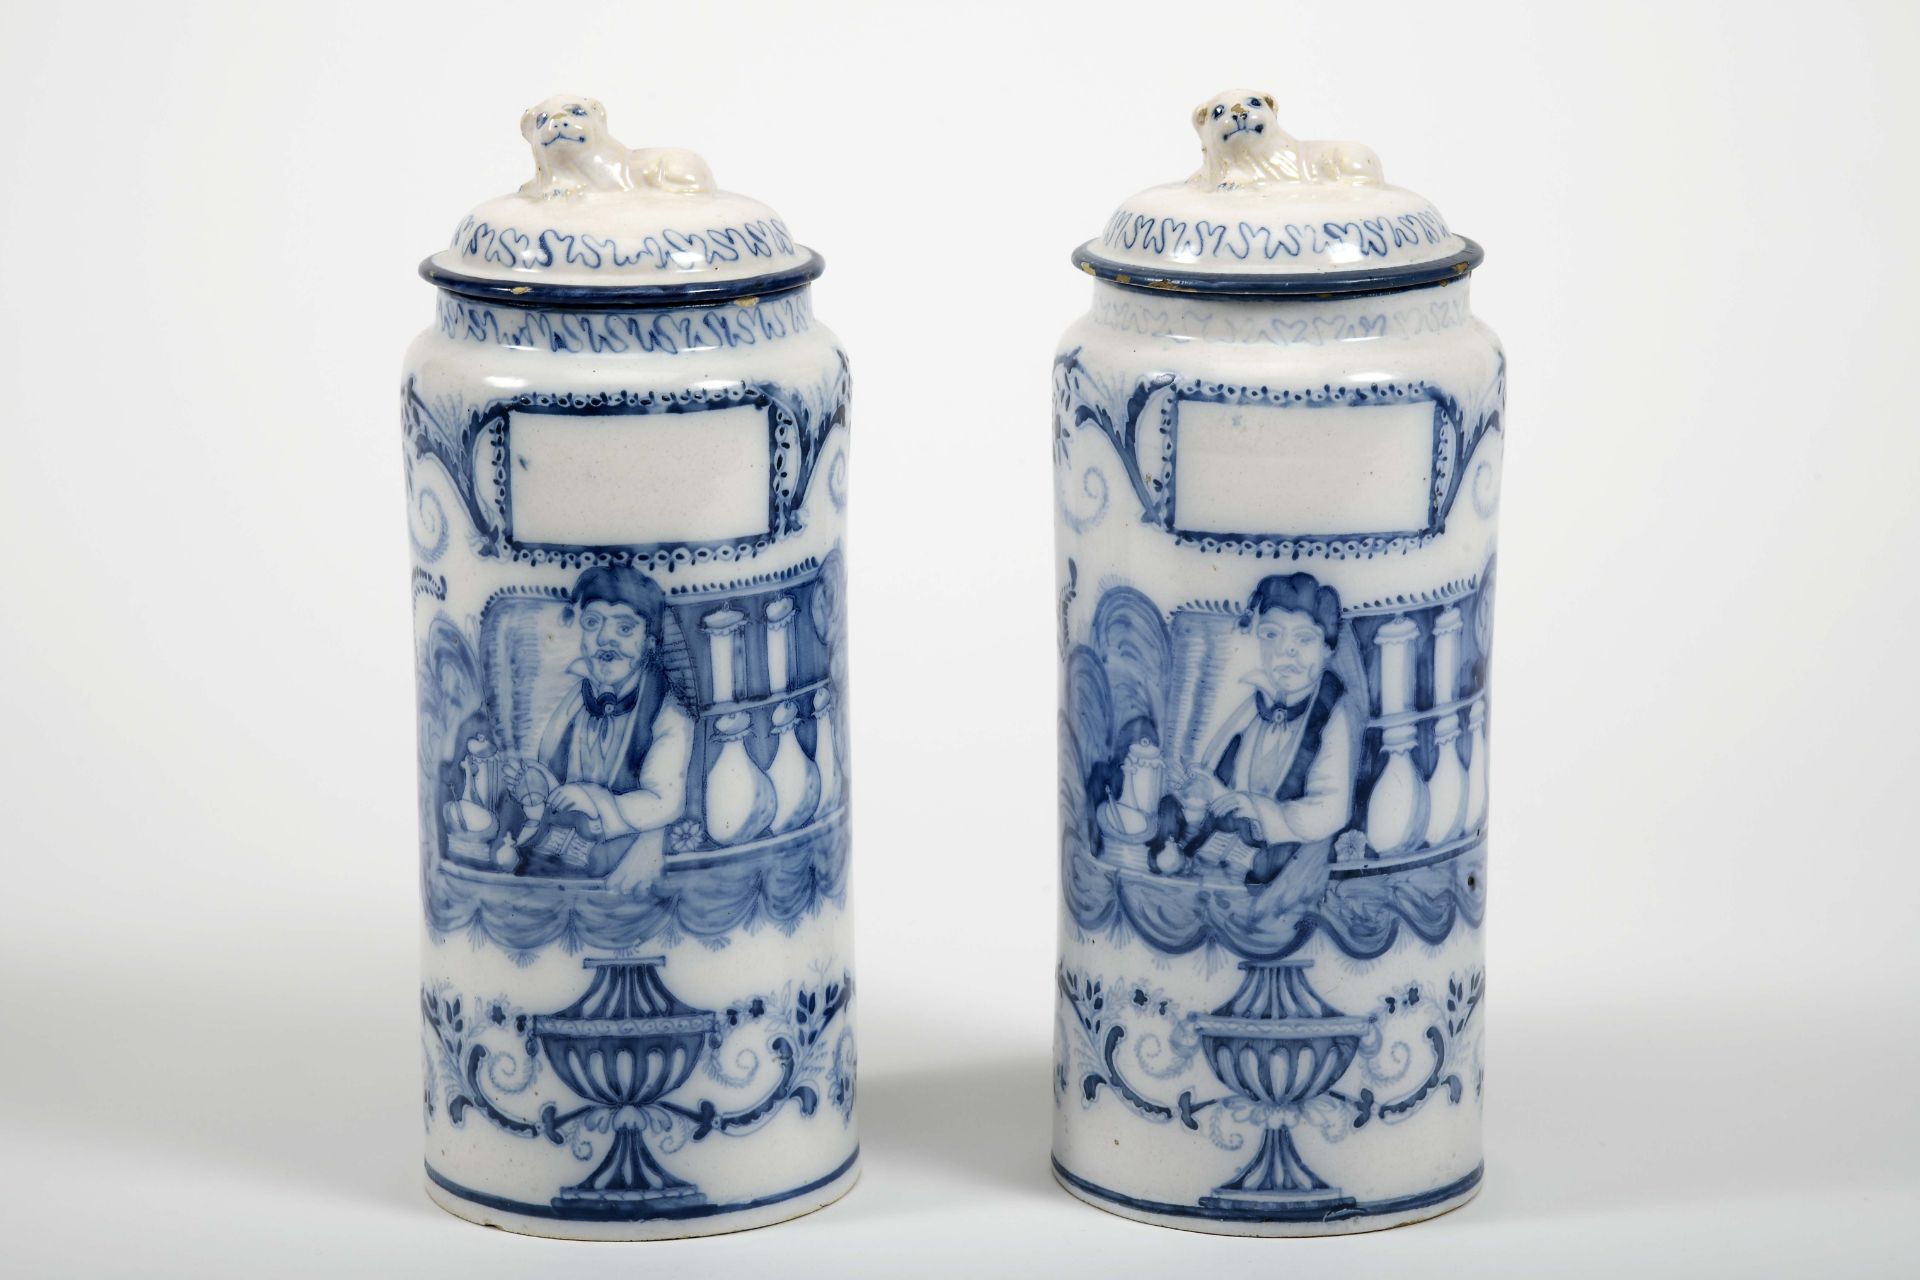 A pair of pharmacy jars with covers